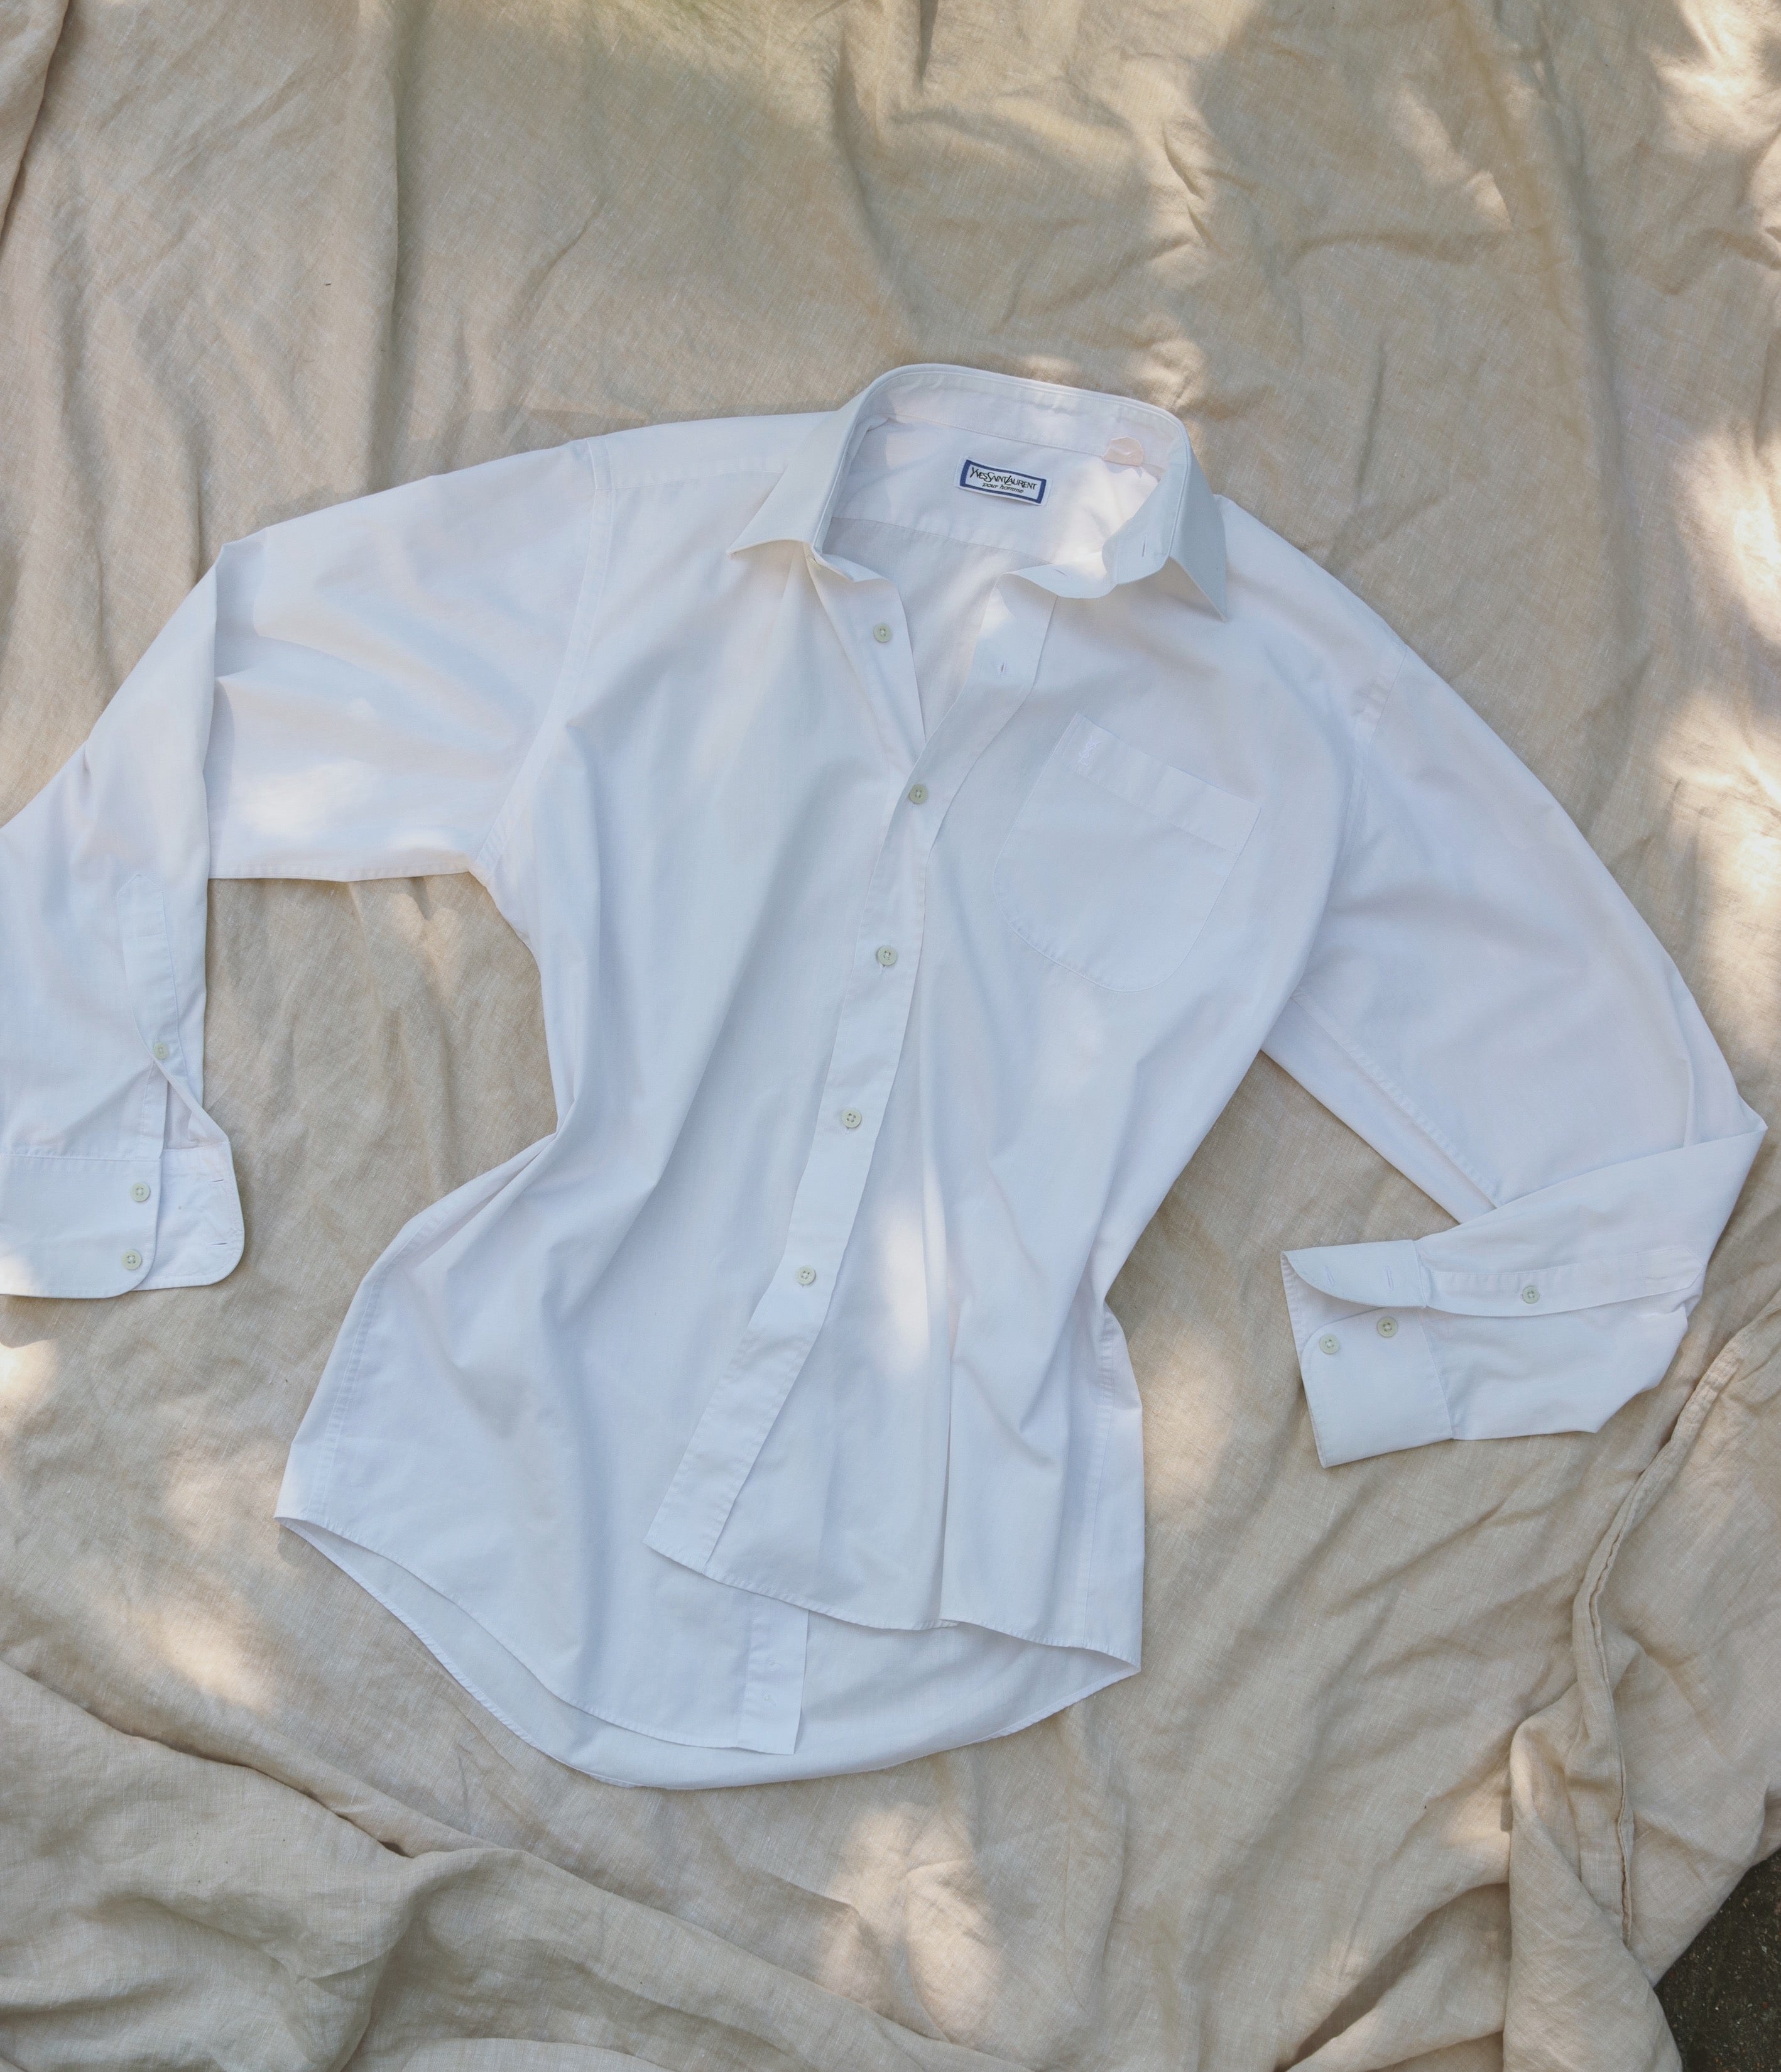 Vintage YSL Pour Homme Shirt 80's  - size S-M - Made in France